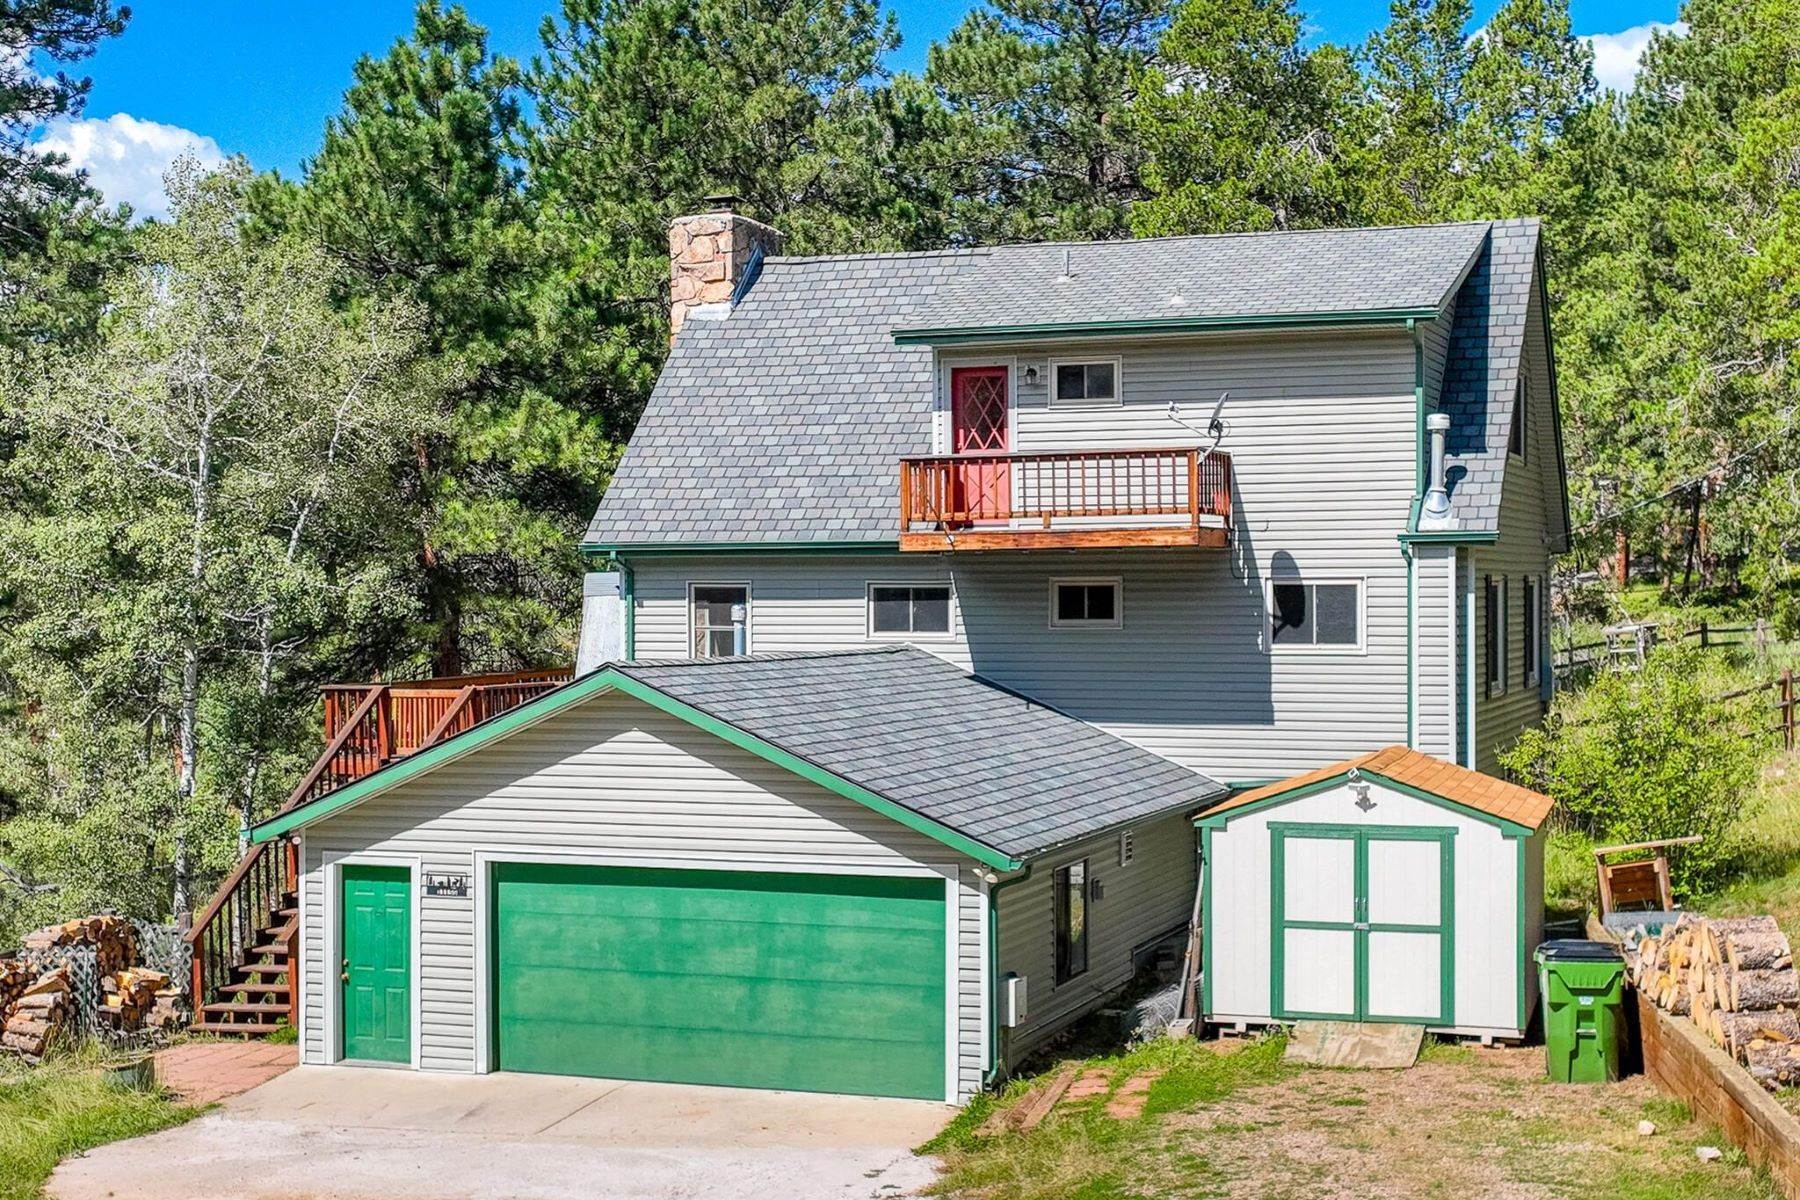 Single Family Homes for Active at Beautiful Conifer Mountain Home 11155 Kennedy Ave Conifer, Colorado 80433 United States